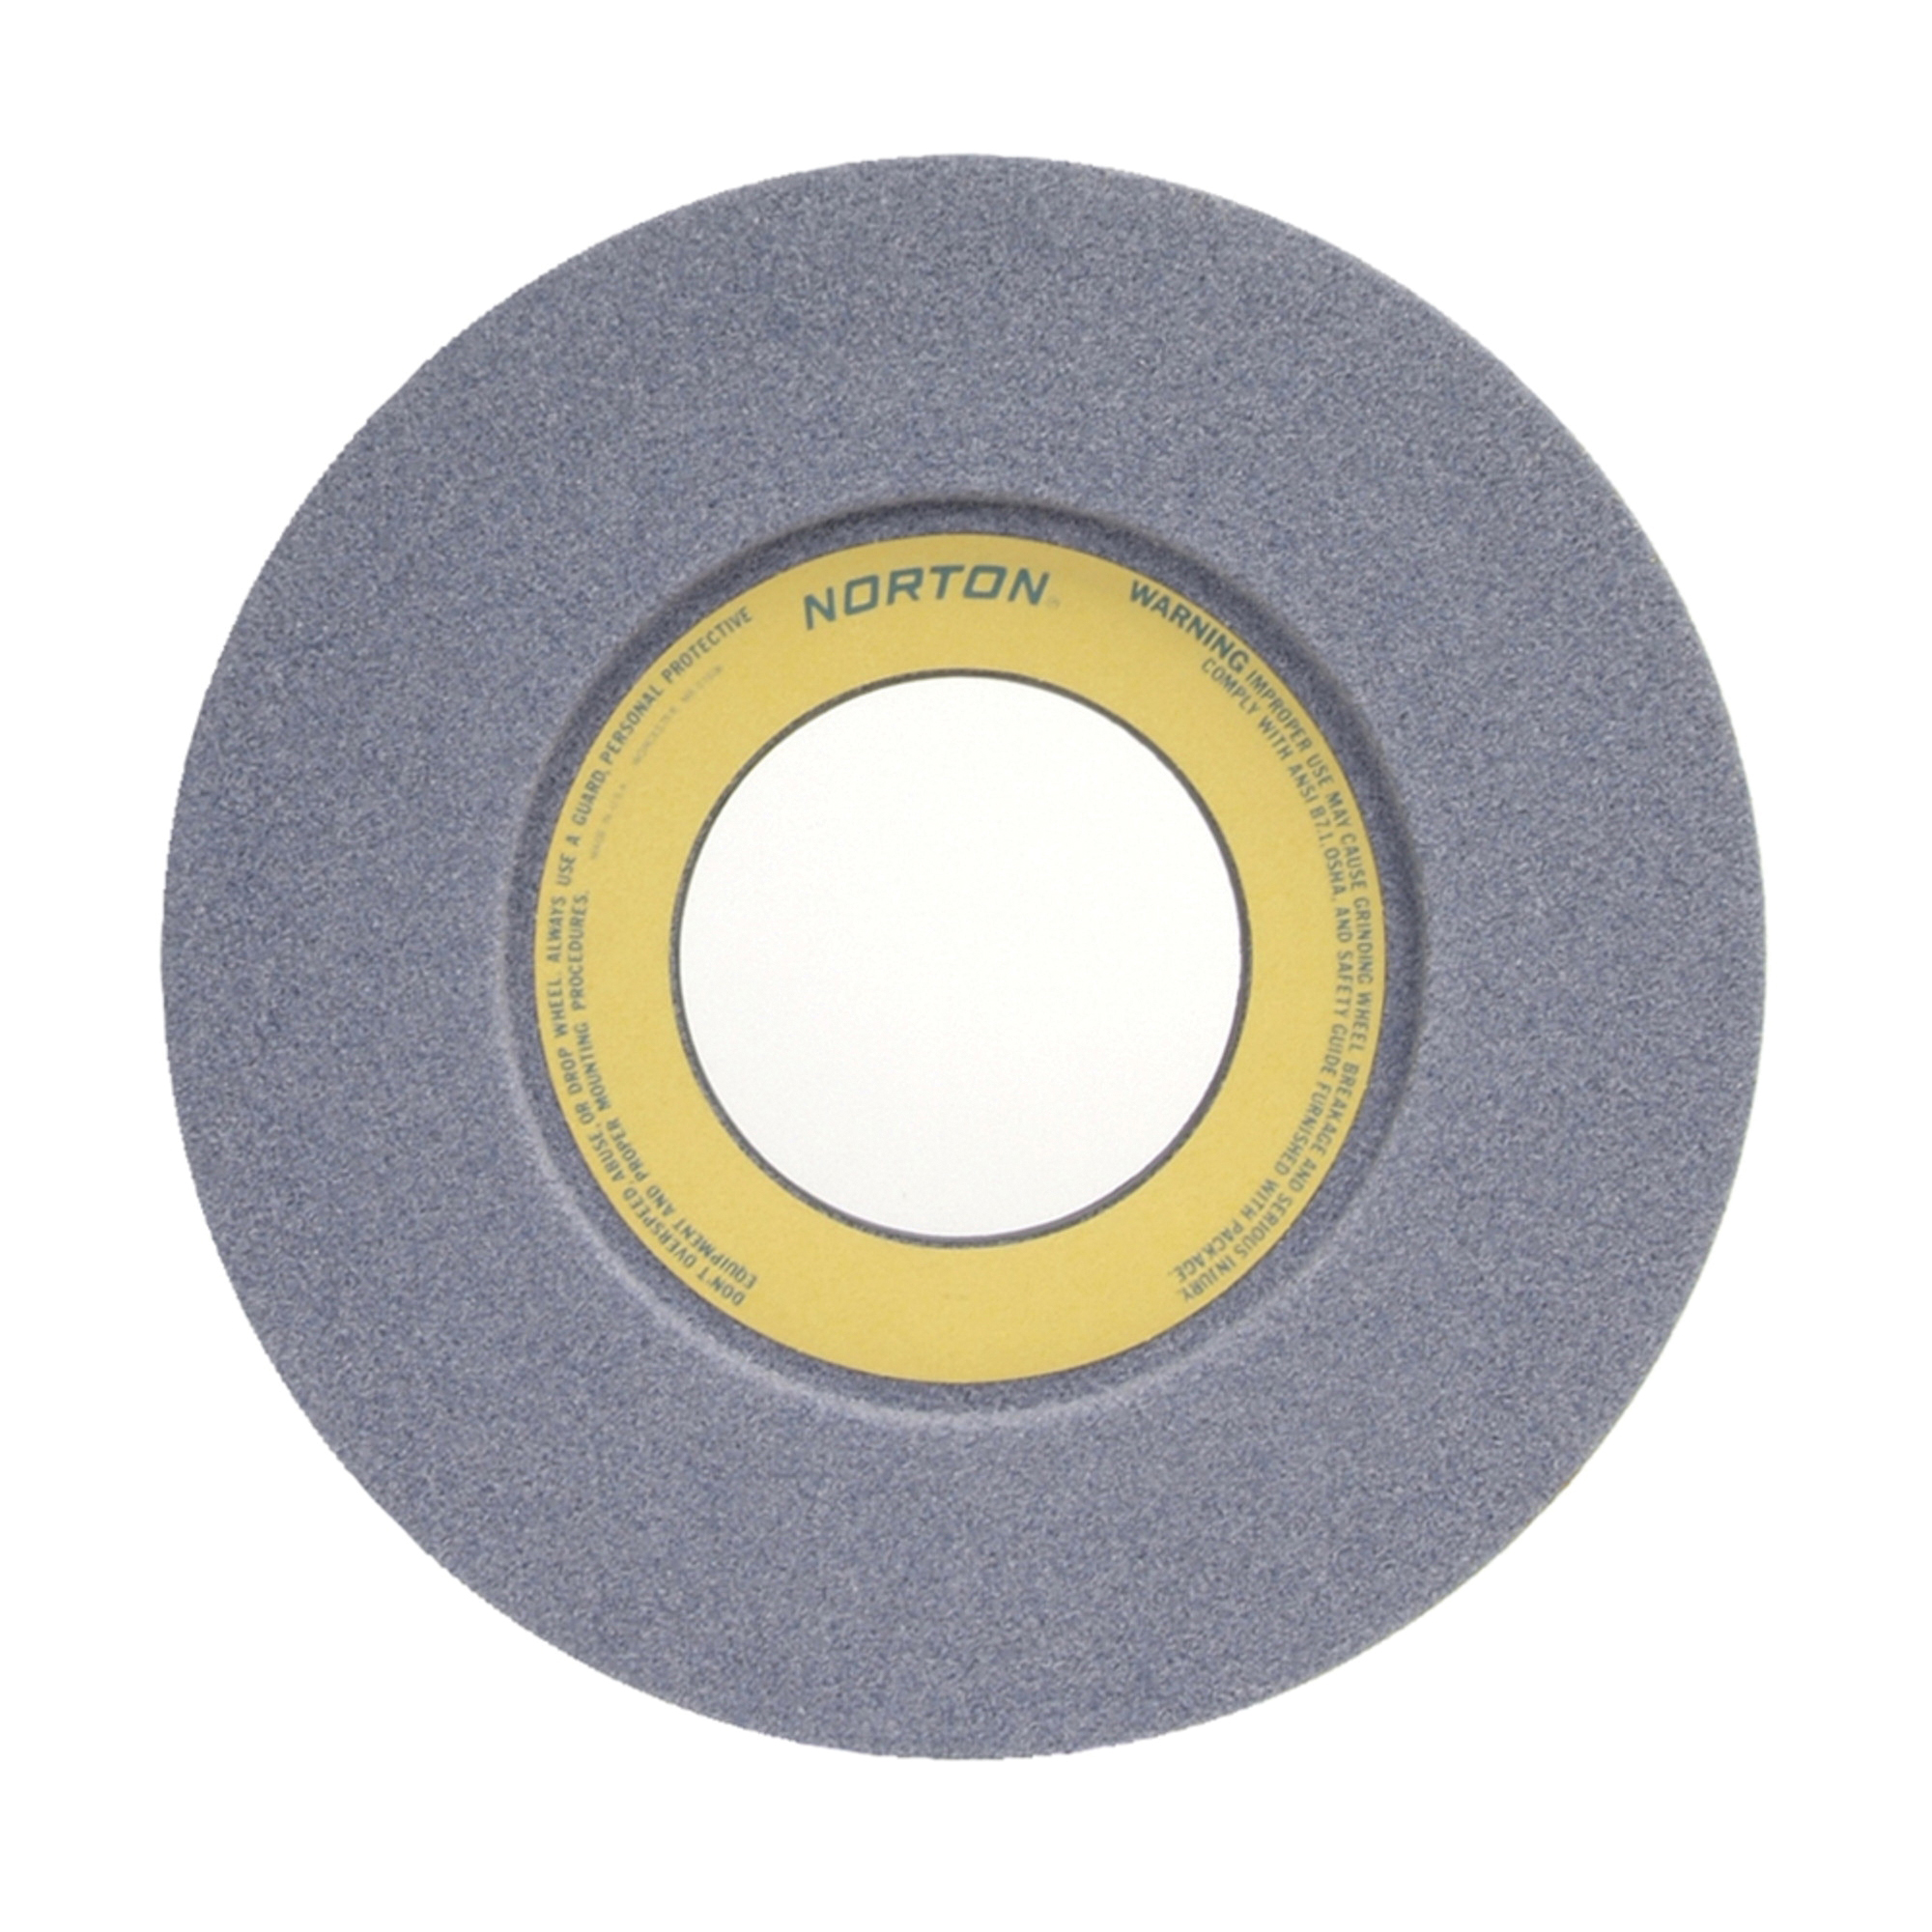 Norton® 66253263166 32A 1-Side Recessed Toolroom Wheel, 12 in Dia x 1-1/2 in THK, 5 in Center Hole, 46 Grit, Aluminum Oxide Abrasive